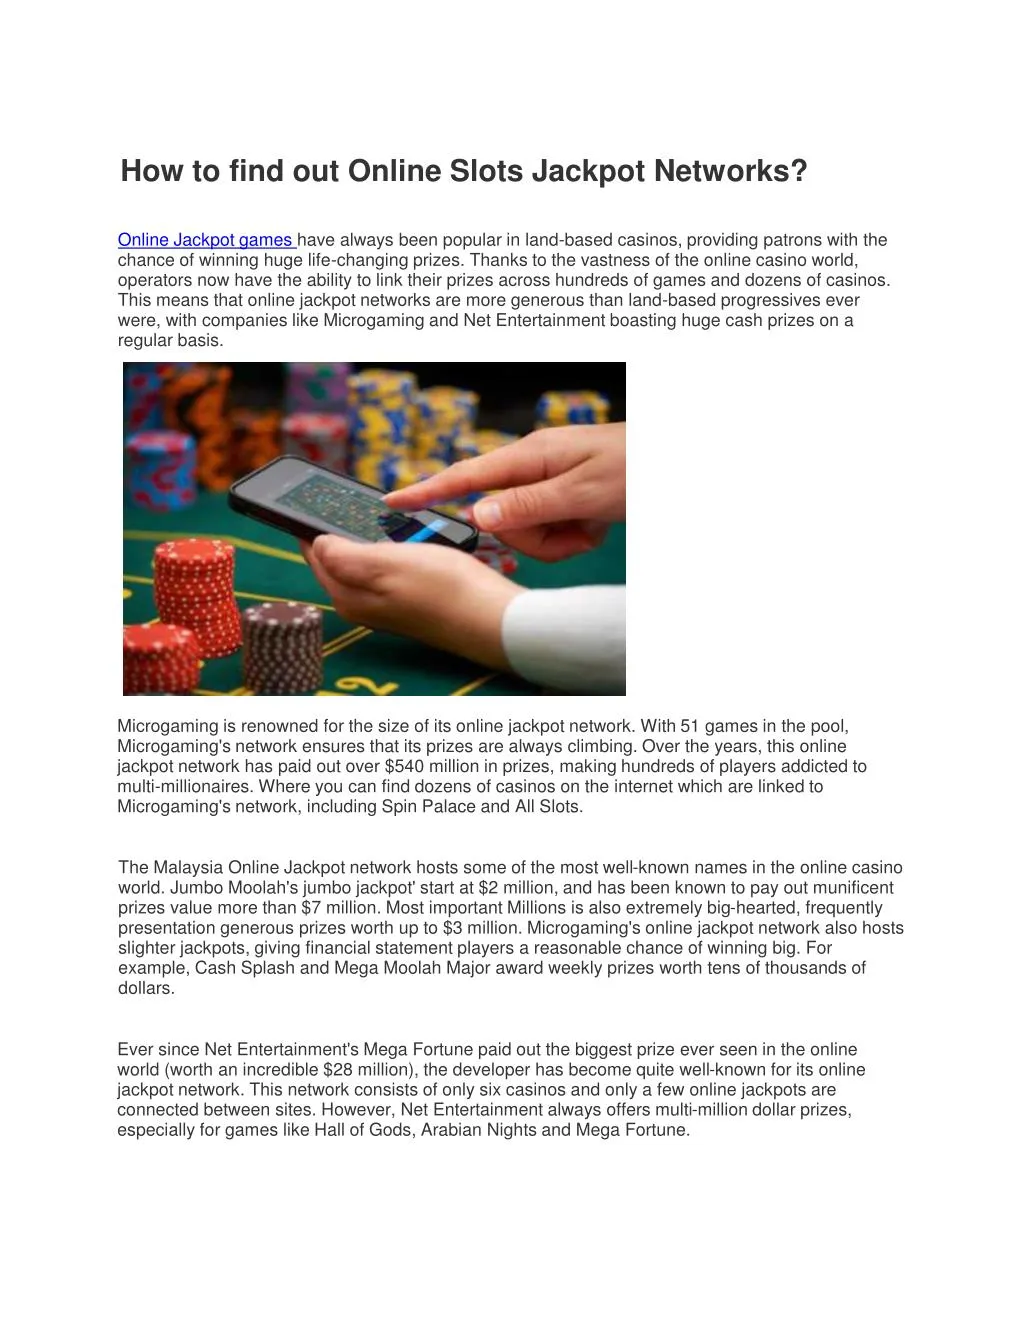 how to find out online slots jackpot networks